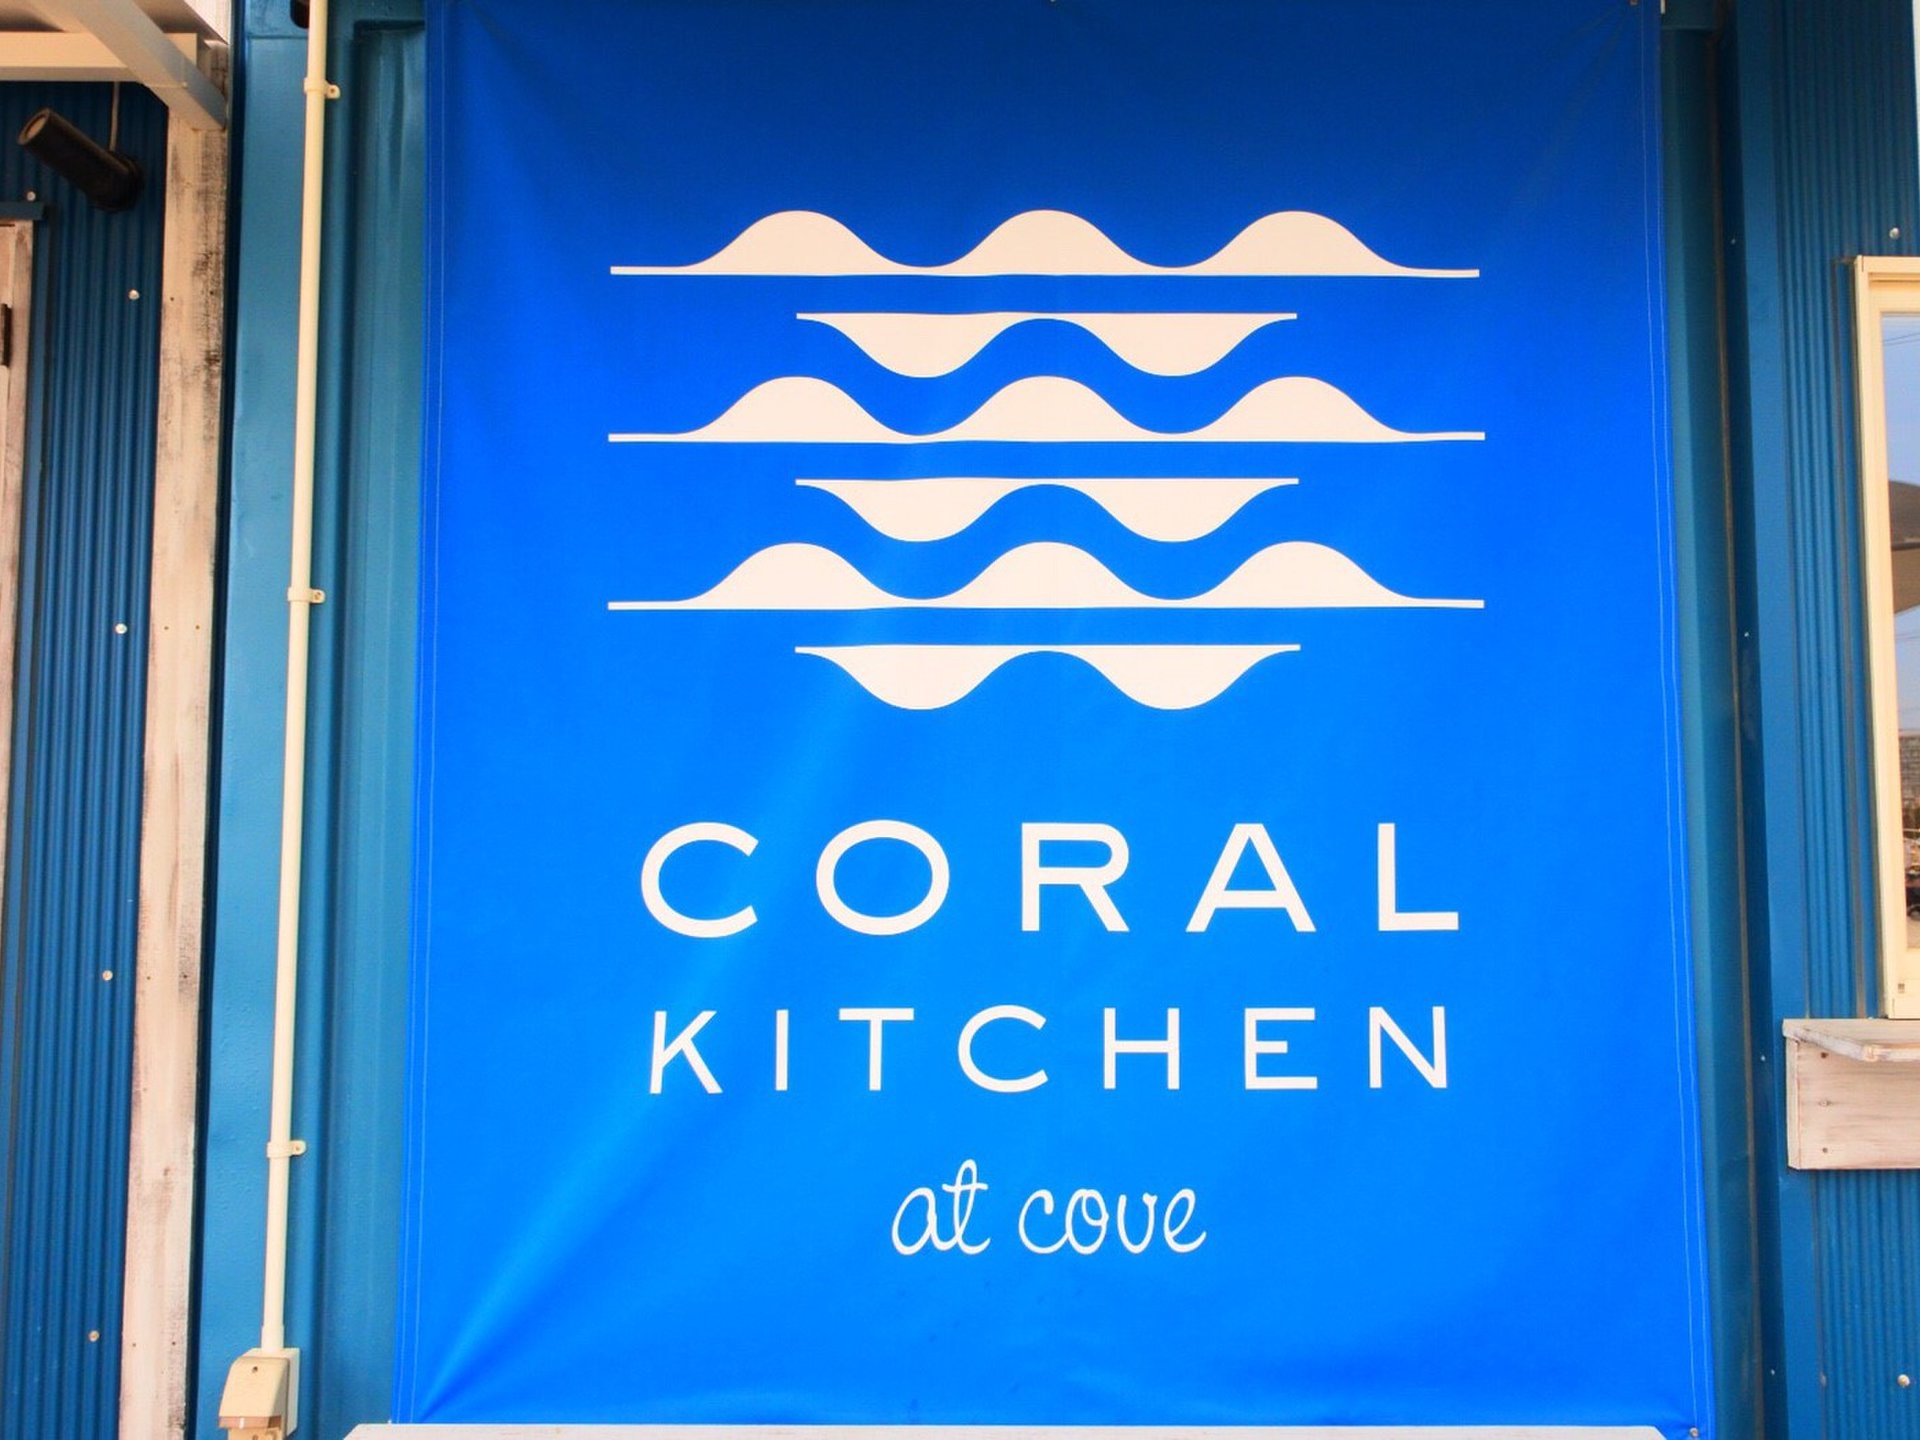 CORAL KITCHEN at cove